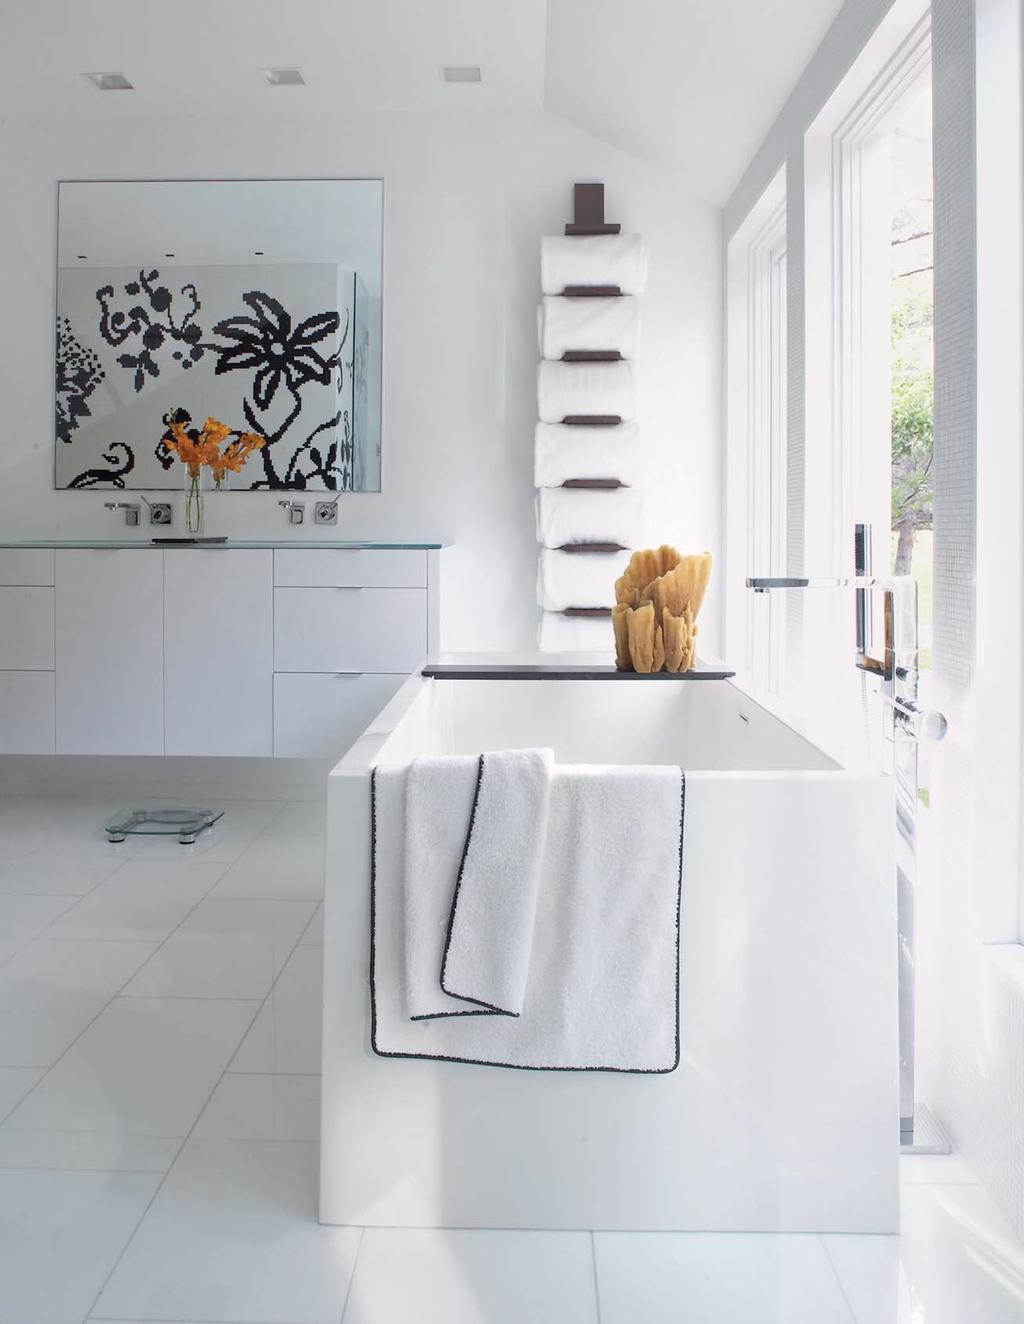 Unique Design WETSTYLE is the domain for the designer bathroom, based on a minimalist aesthetic entirely devoted to the well-being of body and soul rendered into simple, clean forms.